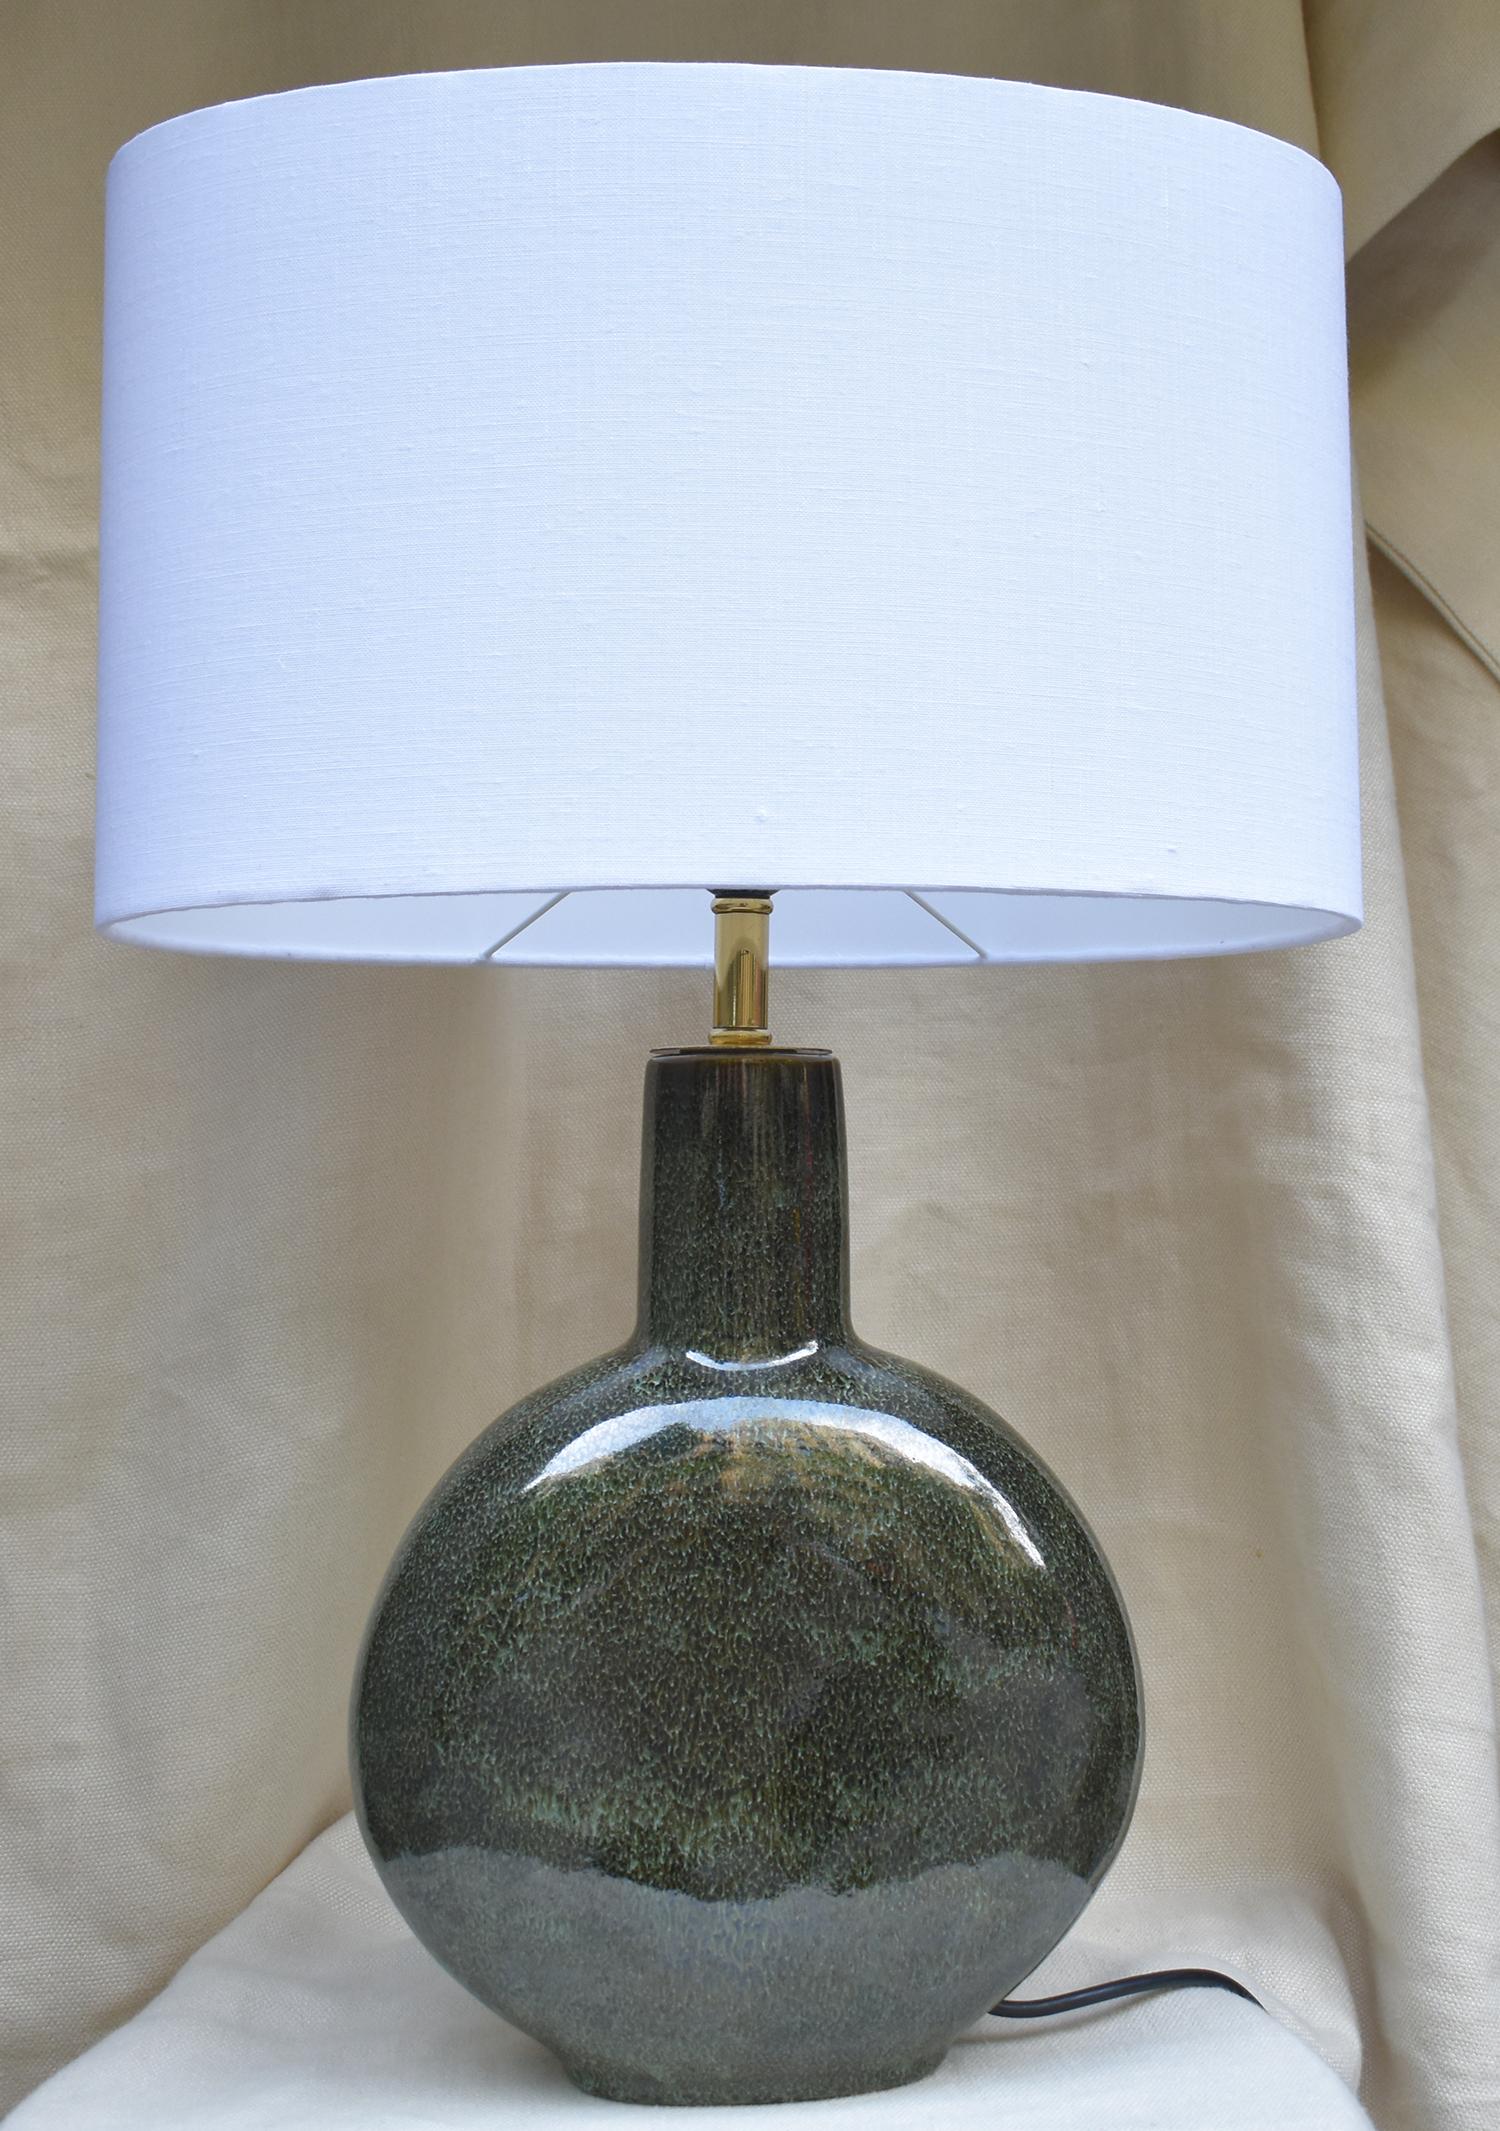 Mid-century Modern, Green Ceramic and Brass Table Lamp by Valenti, Spain 1970s For Sale 5